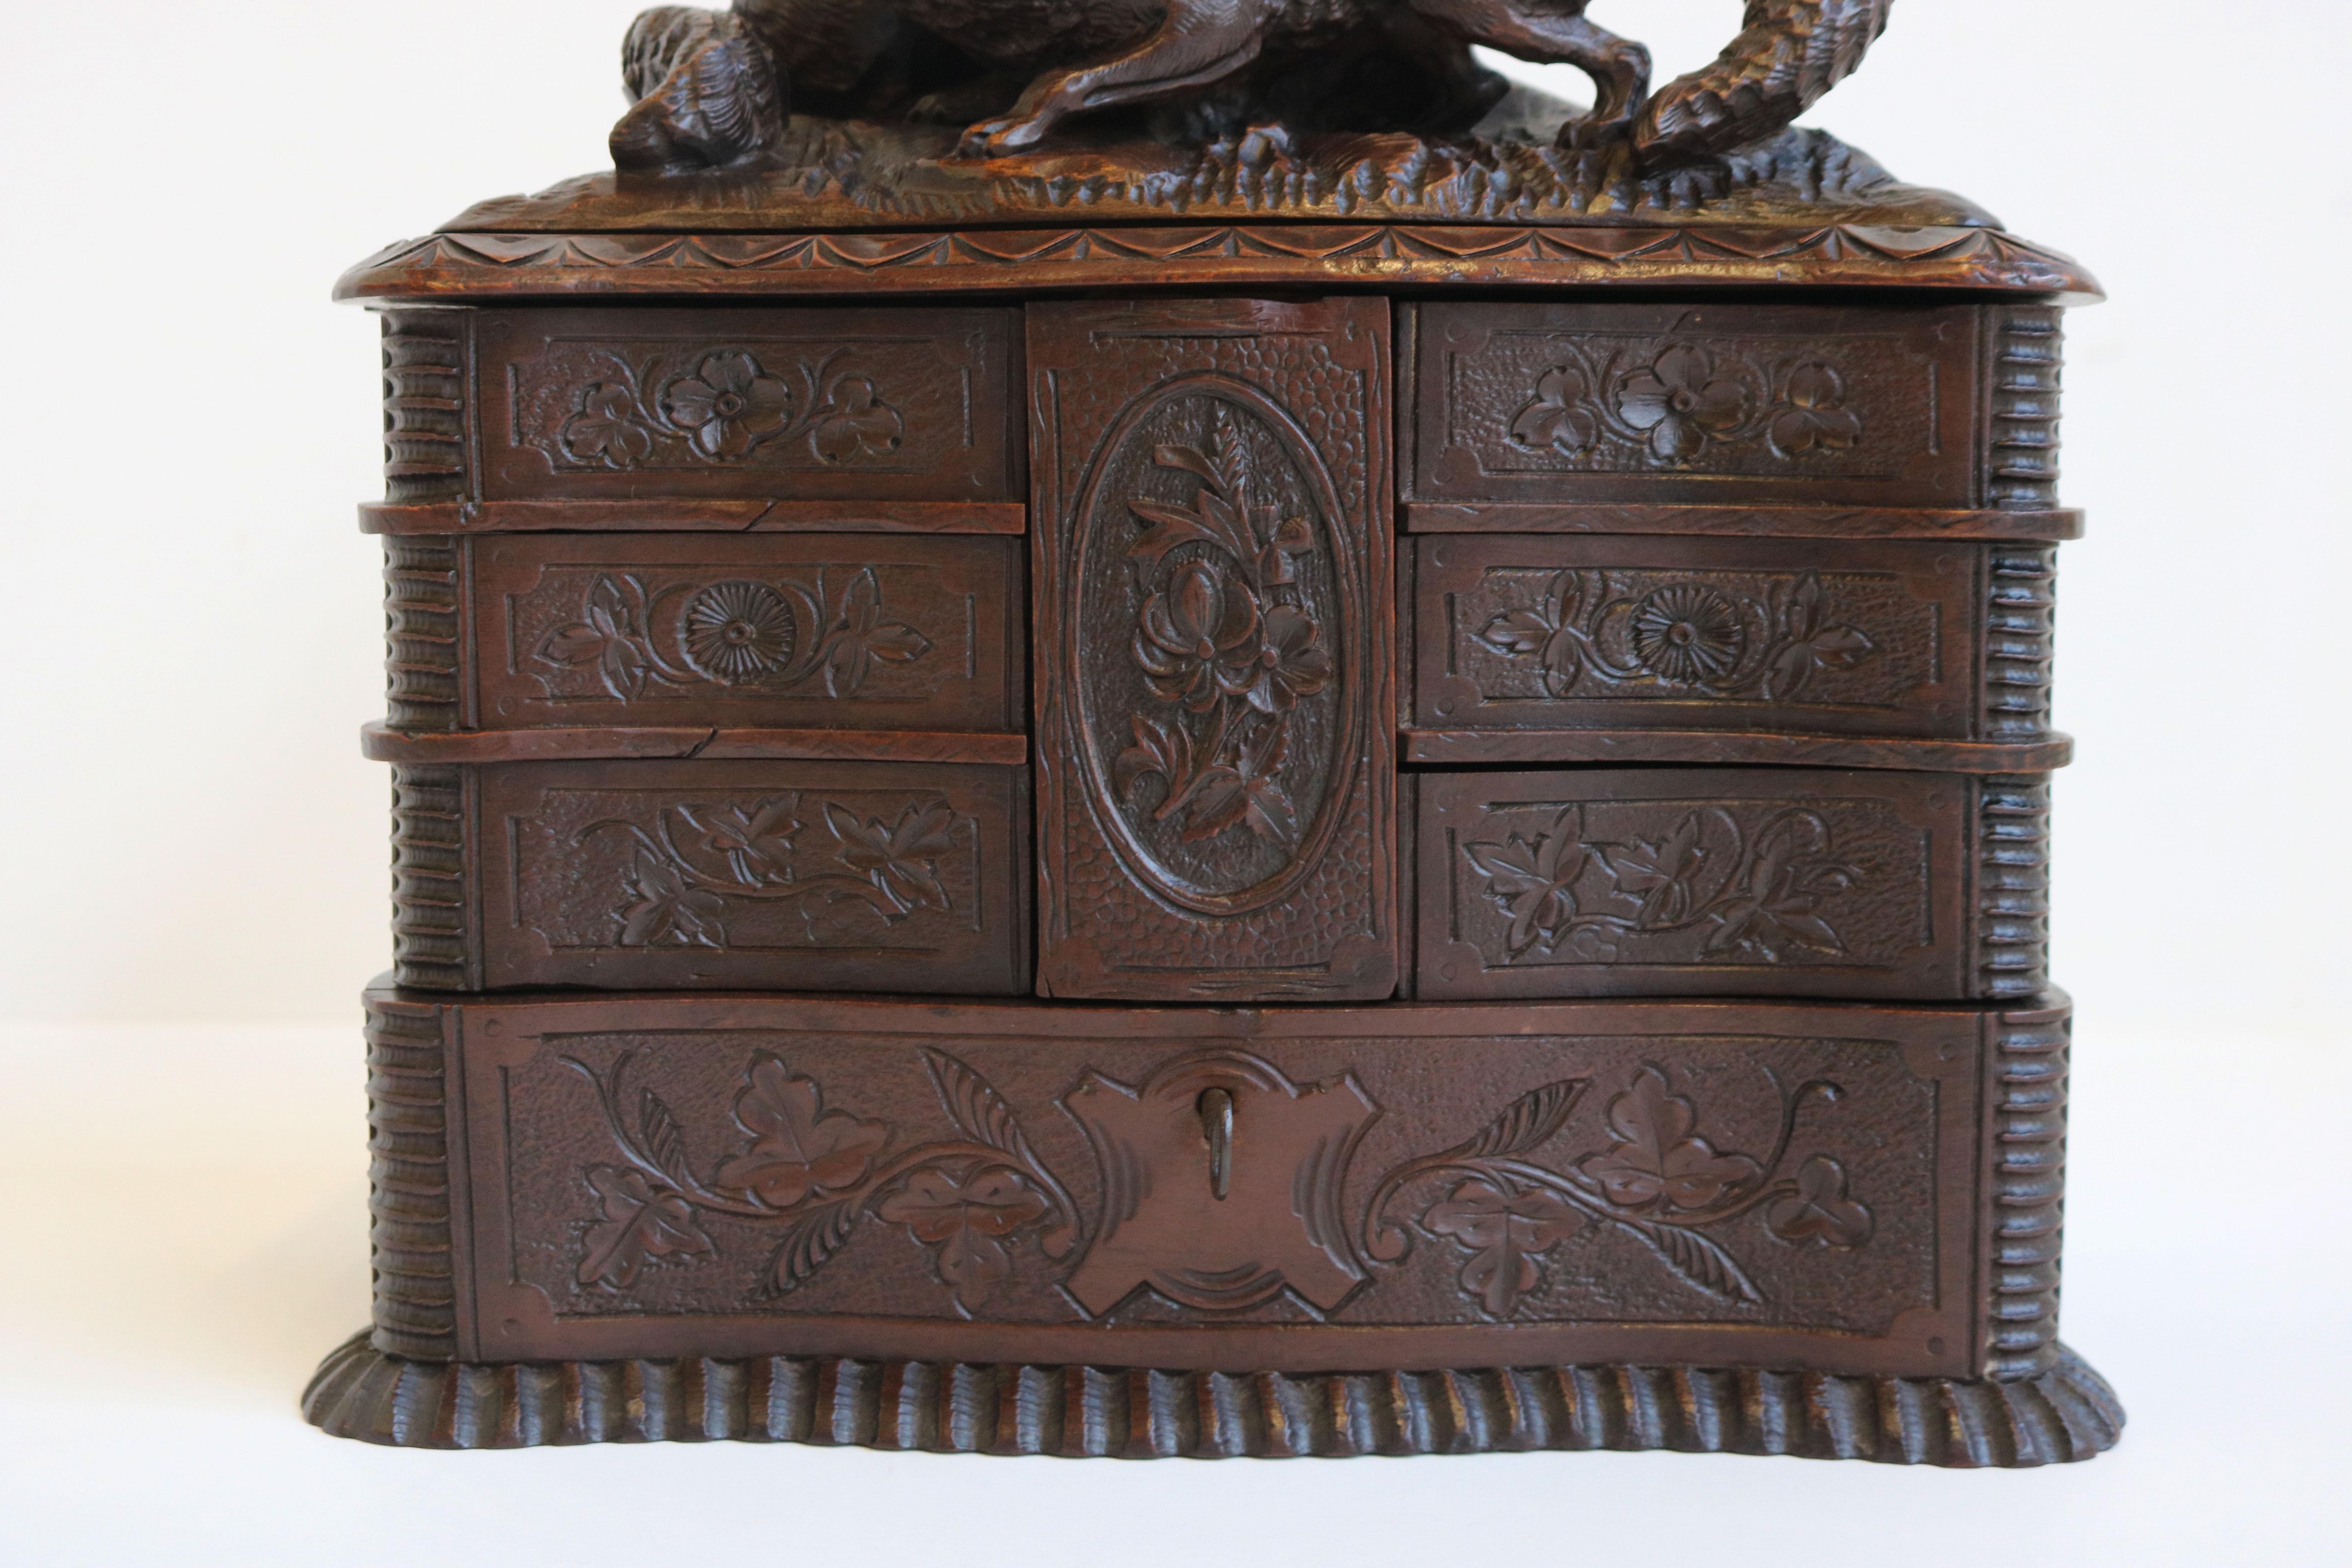 Rare Antique 4 Tier Black Forest Jewelry Box Fruitwood 19th Century Hand Carved For Sale 8